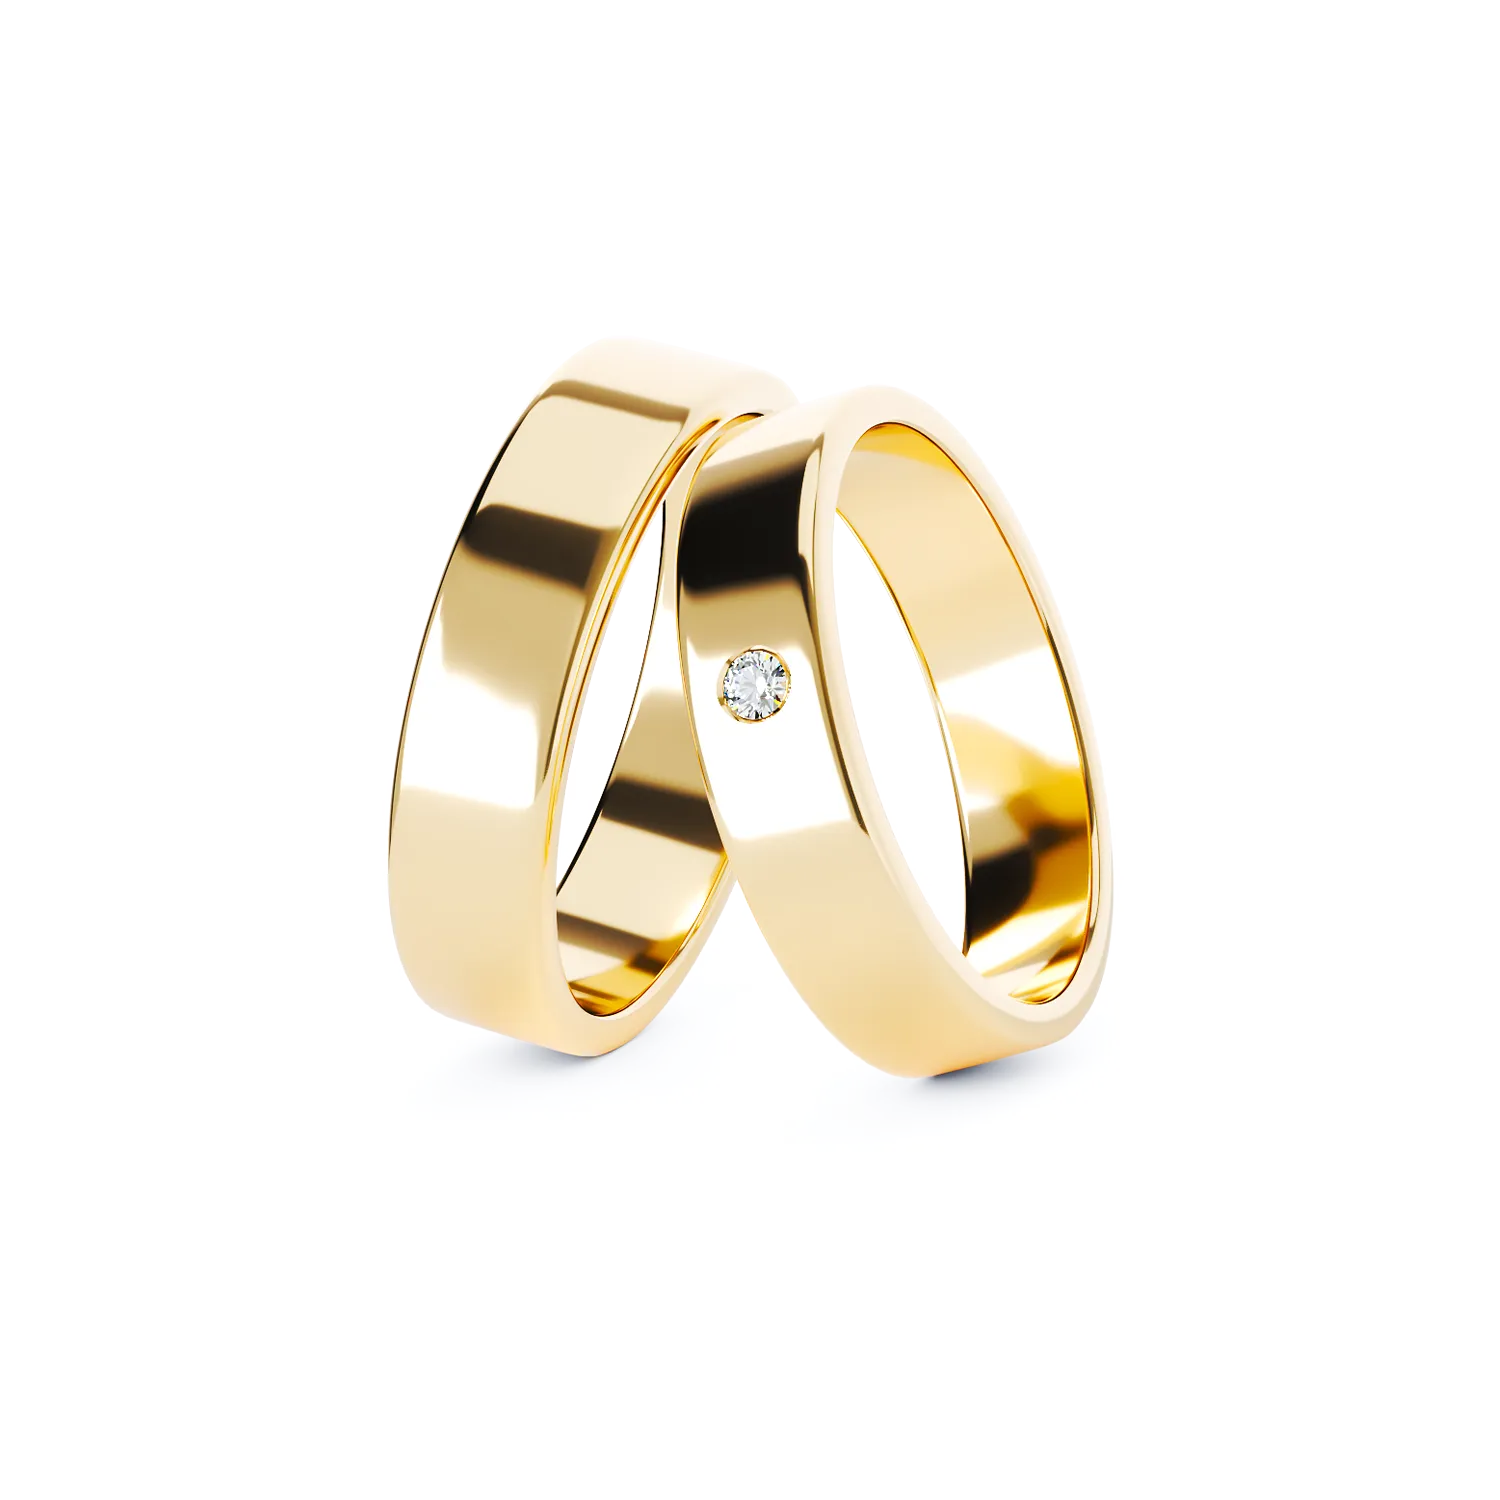 CLAIRE gold wedding rings